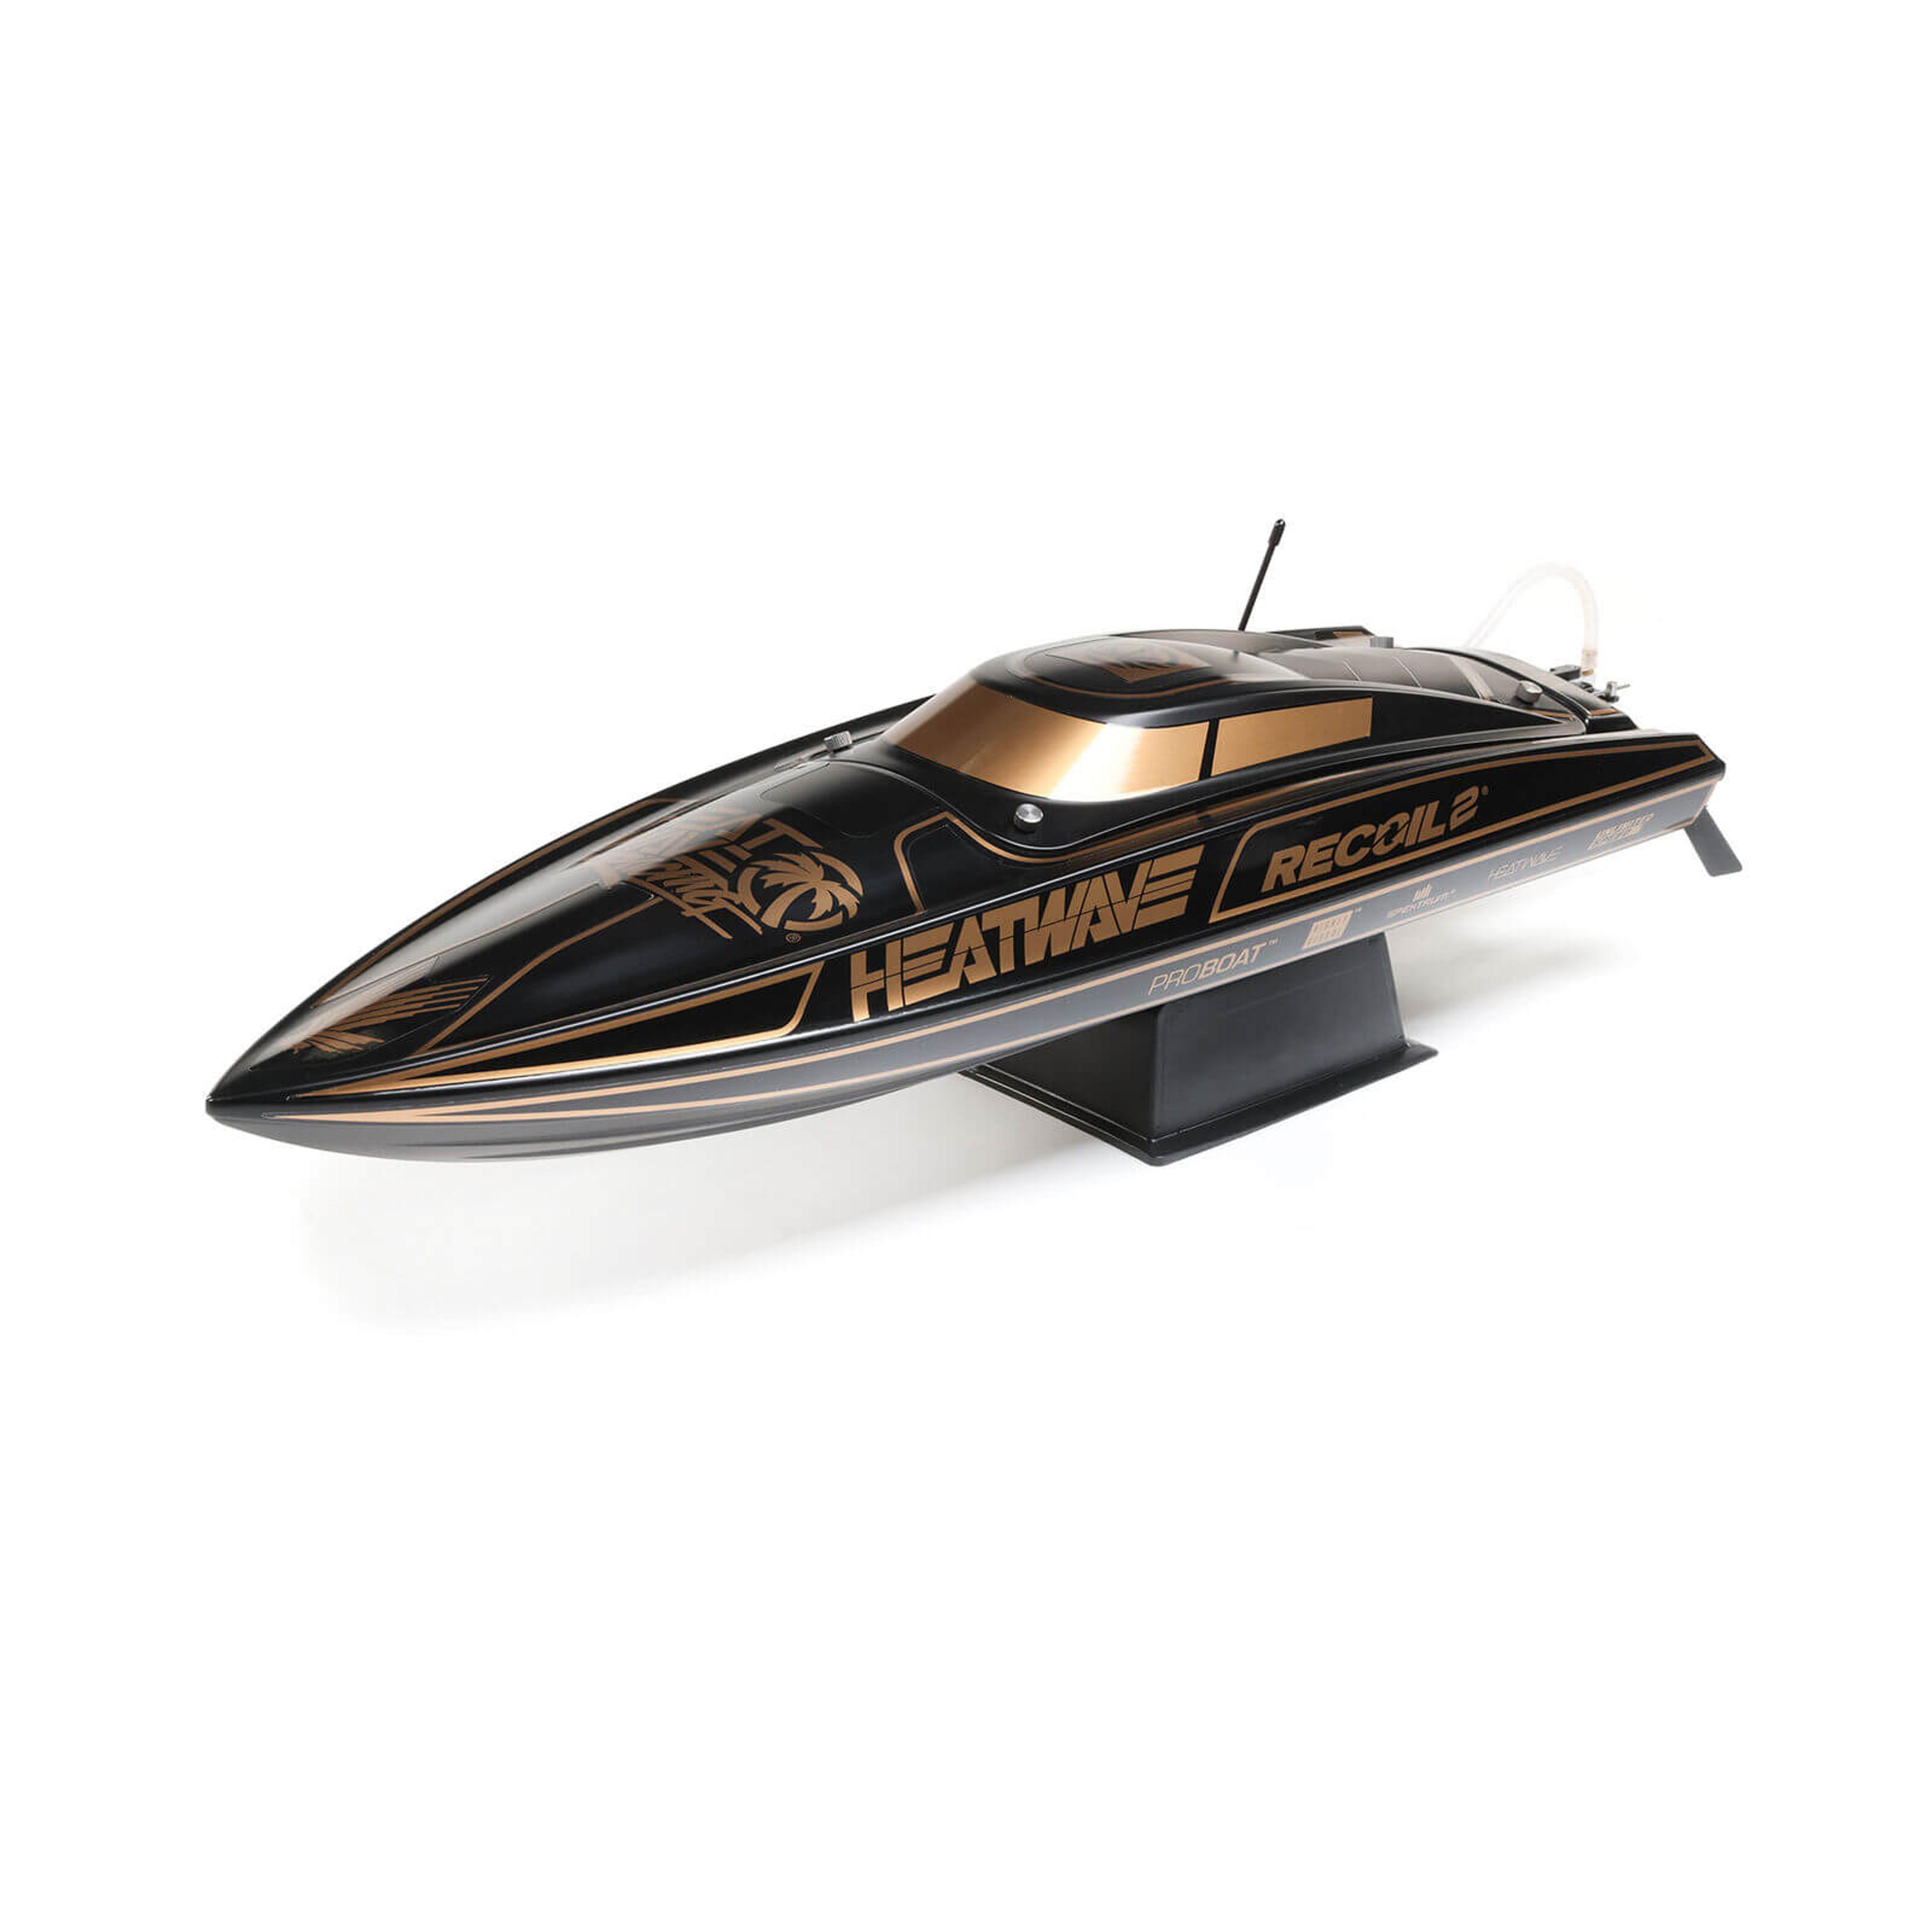 Recoil 2 V2 26in Self-Righting Brushless Deep-V RTR R/C Boat (Heat Wave)